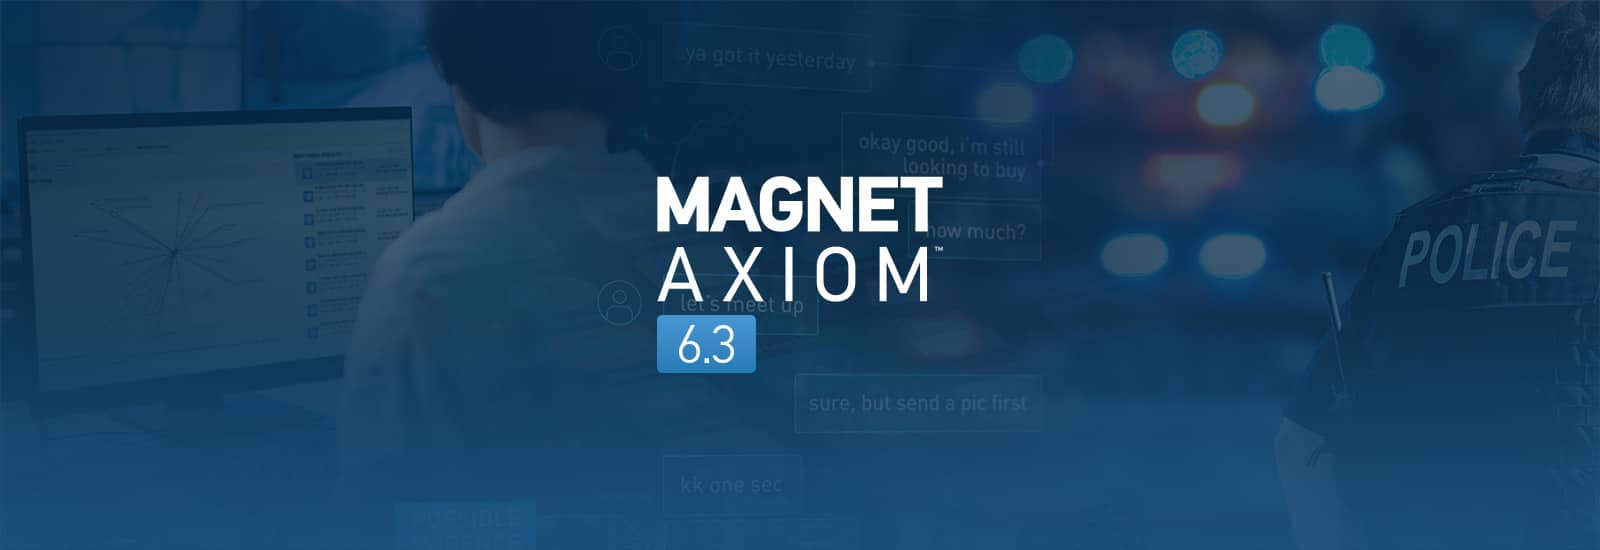 A decorative header for the Magnet AXIOM 6.3 release